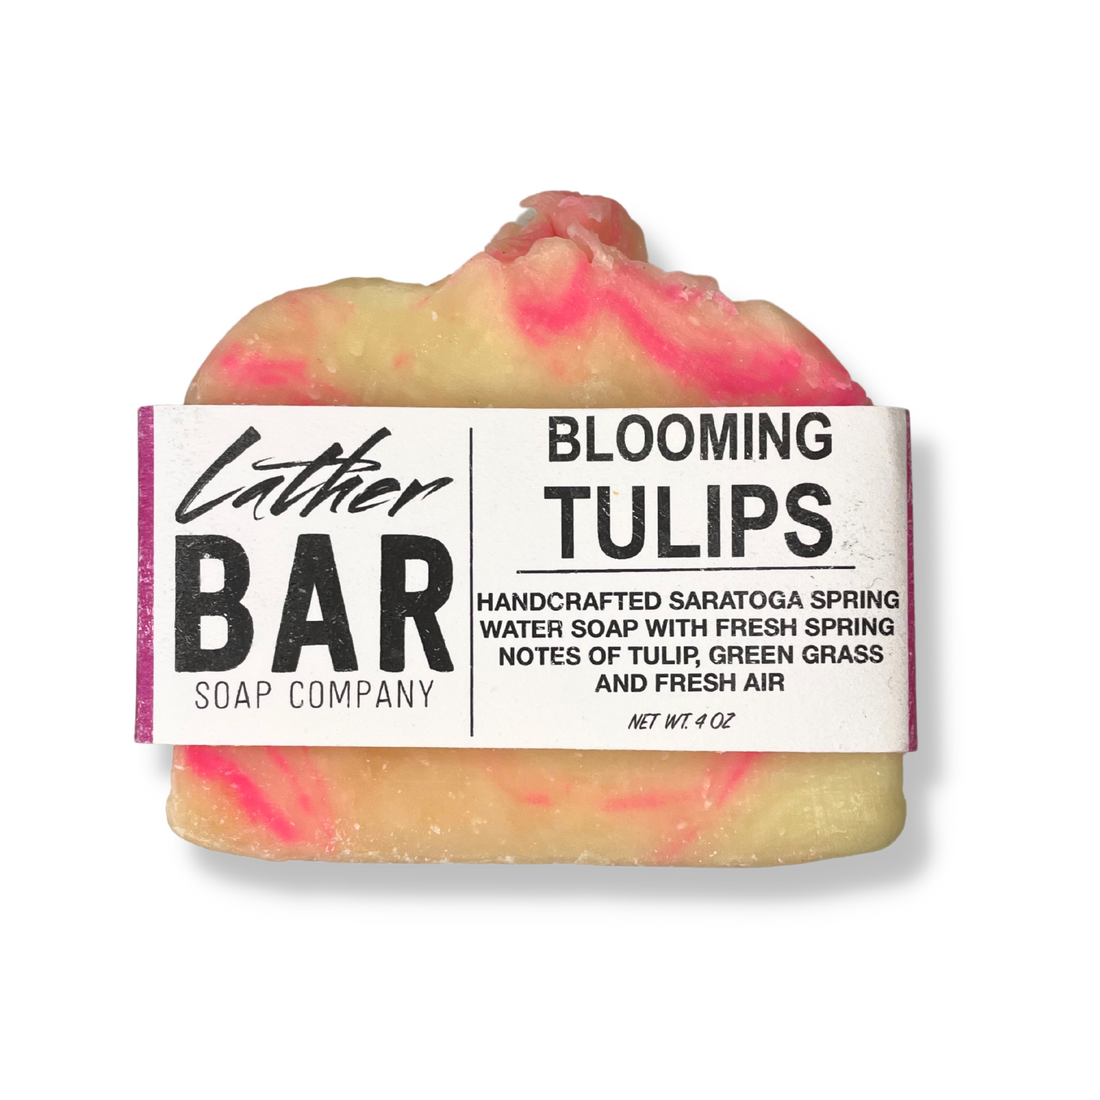 Lather Bar Soap Company Blooming Tulips Bar In Paper Sleeve On White Background.